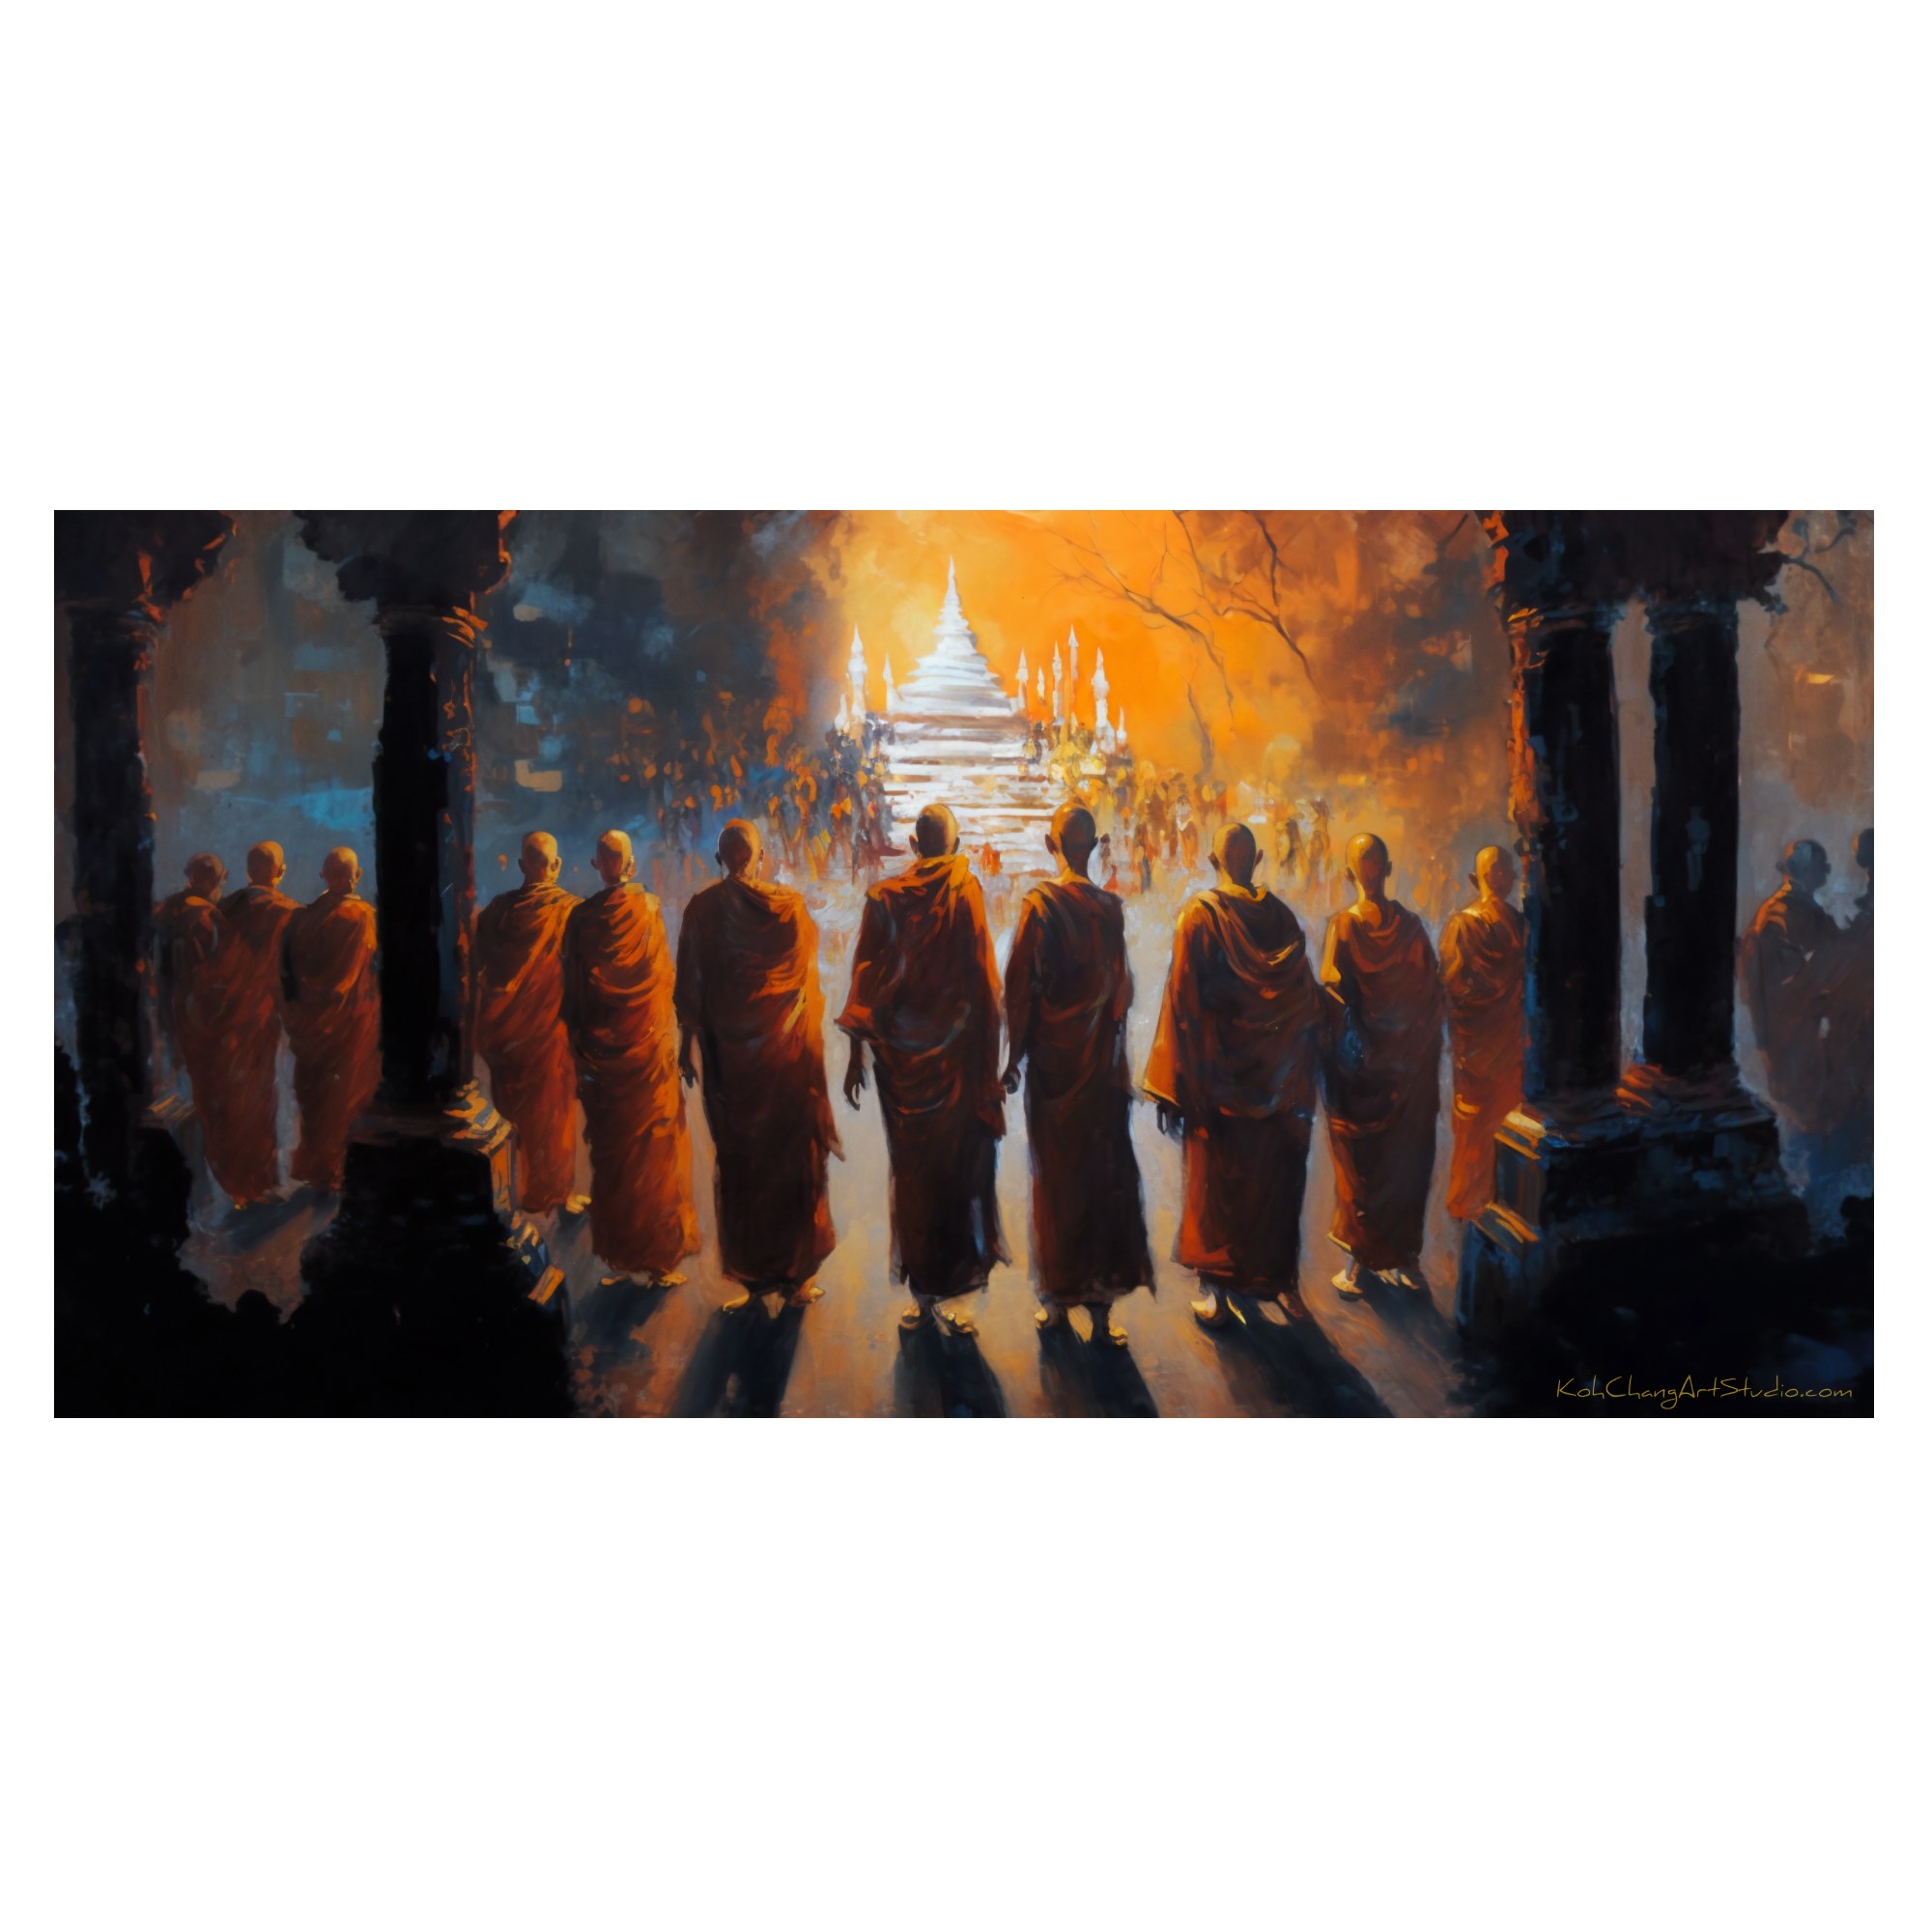 MEDITATION IN MOTION Image - Monks turned towards a beacon, reflecting commitment.